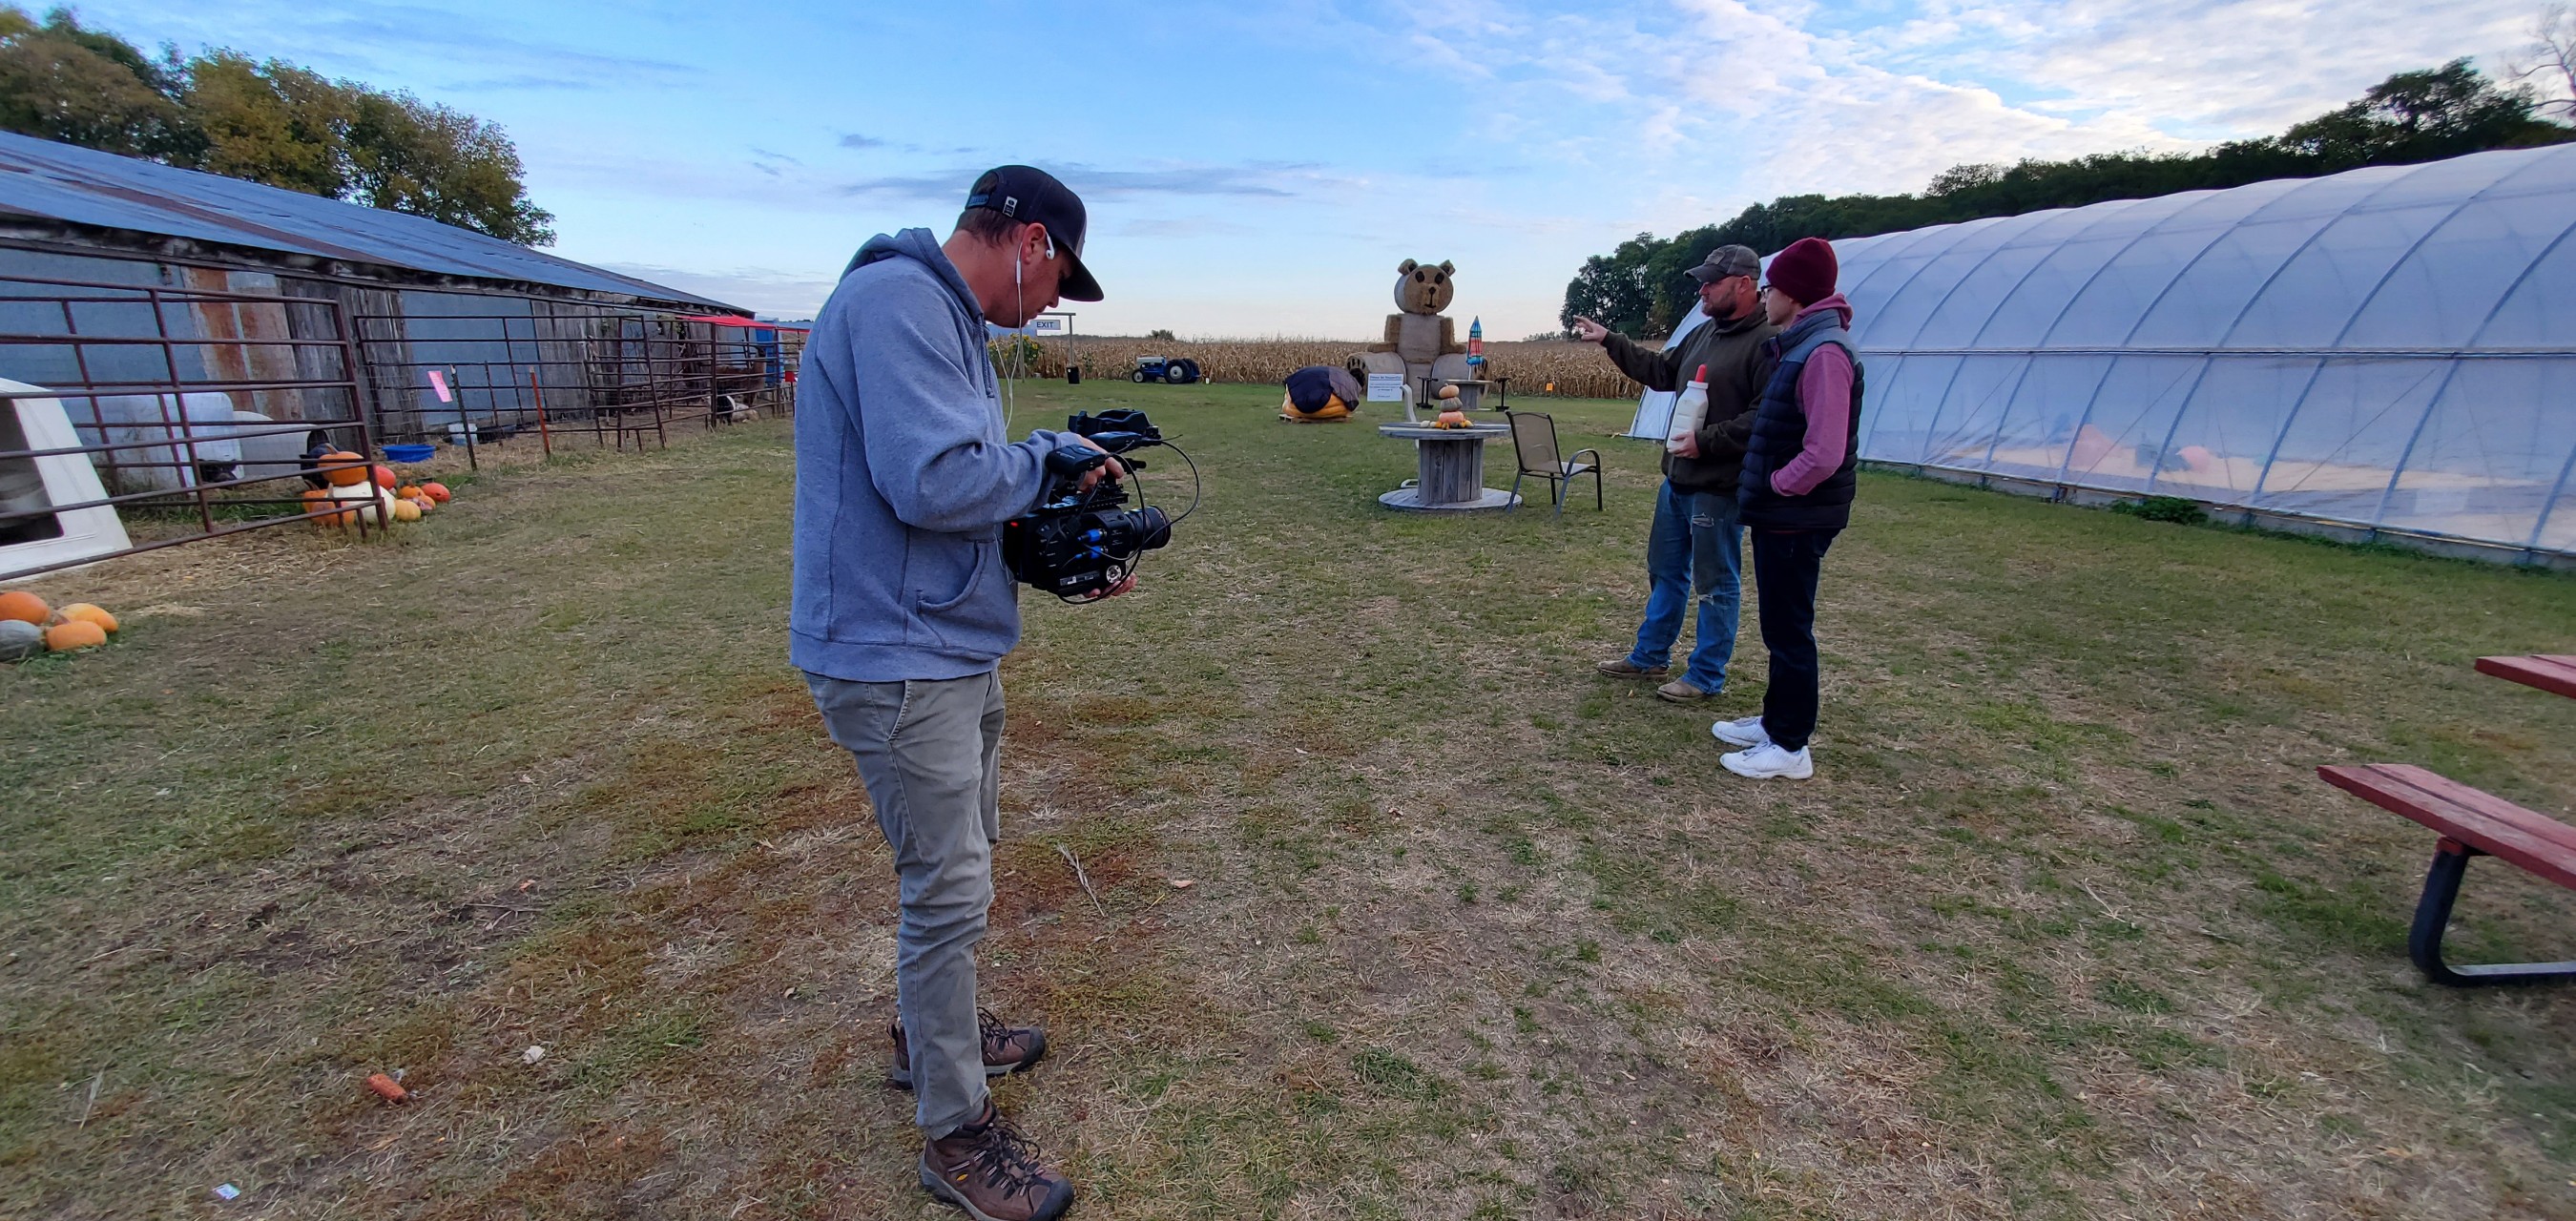 'Rural By Choice' Host Cory Hepola visits with Cordell Huebsch at Otter Berry Farm in Otter Tail County, MN while Micah Kvidt of Kvidt Creative documents their chat.